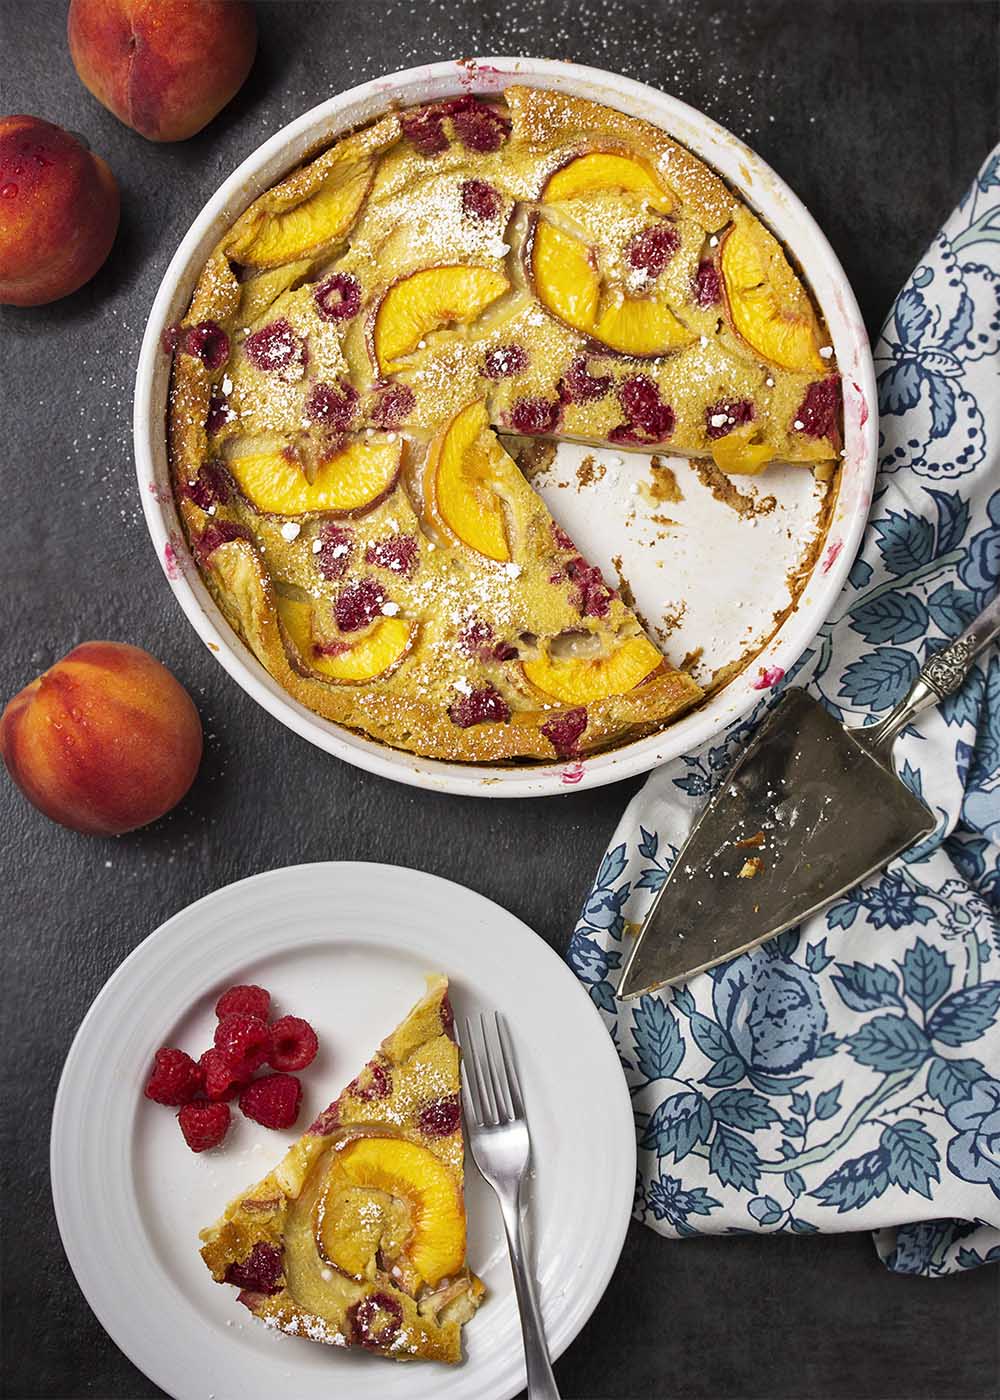 Tender custard filled with fresh fruit! This French recipe for raspberry peach clafoutis makes a great change from pancakes for breakfast and is impressive enough for dessert. | justalittlebitofbacon.com